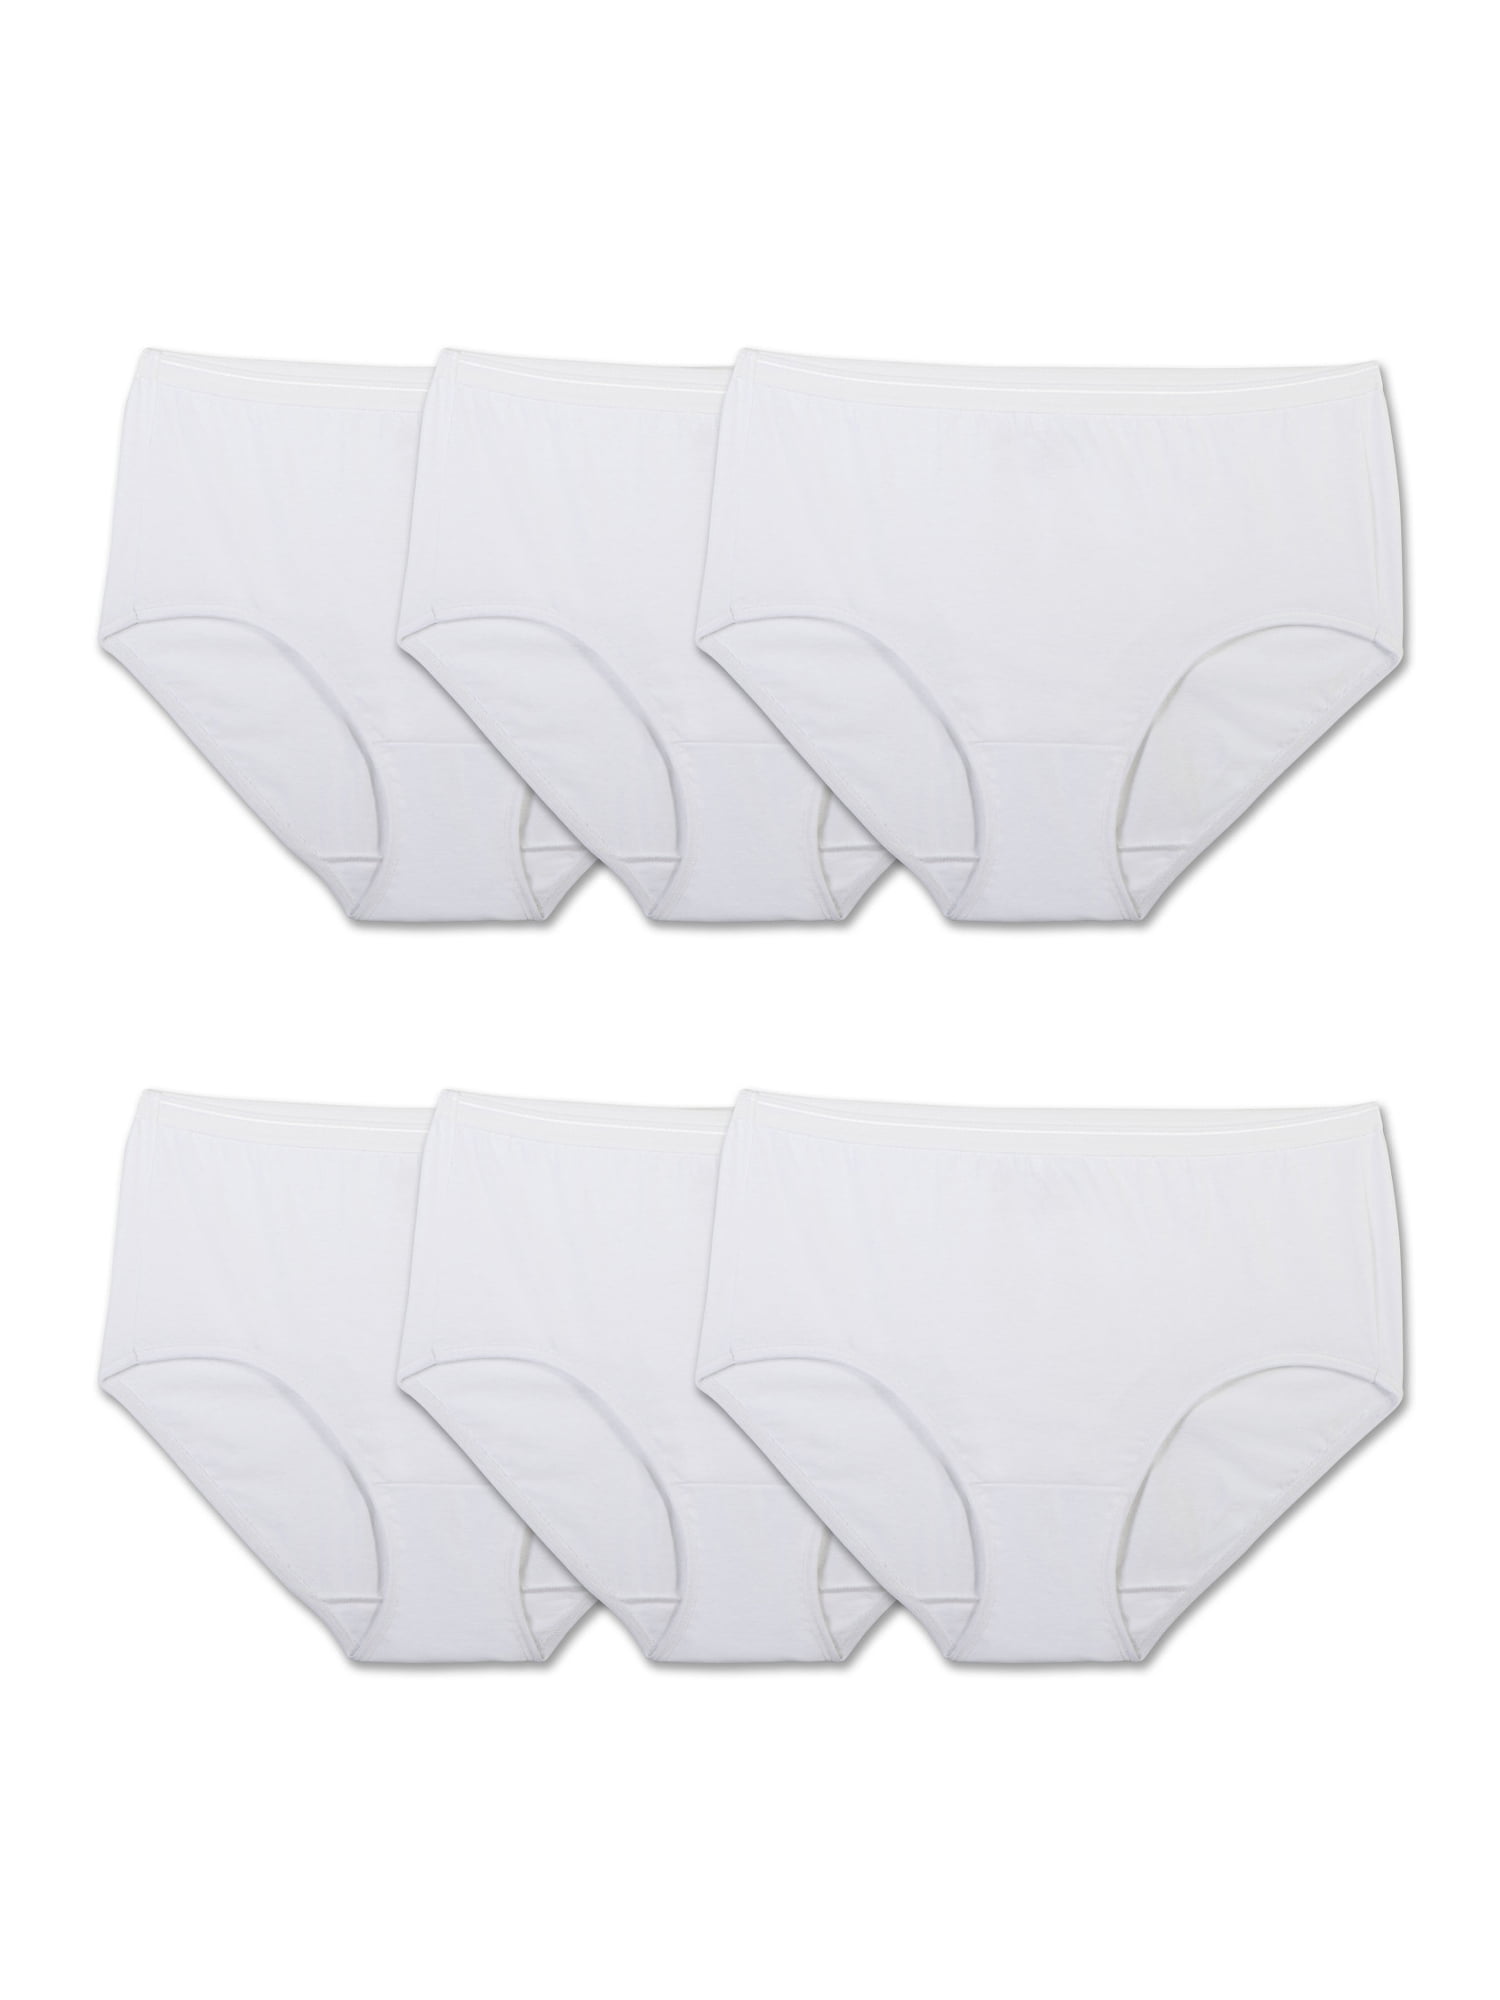 Fruit of the Loom Women's Assorted Cotton Brief Underwear, 6-Pack ...